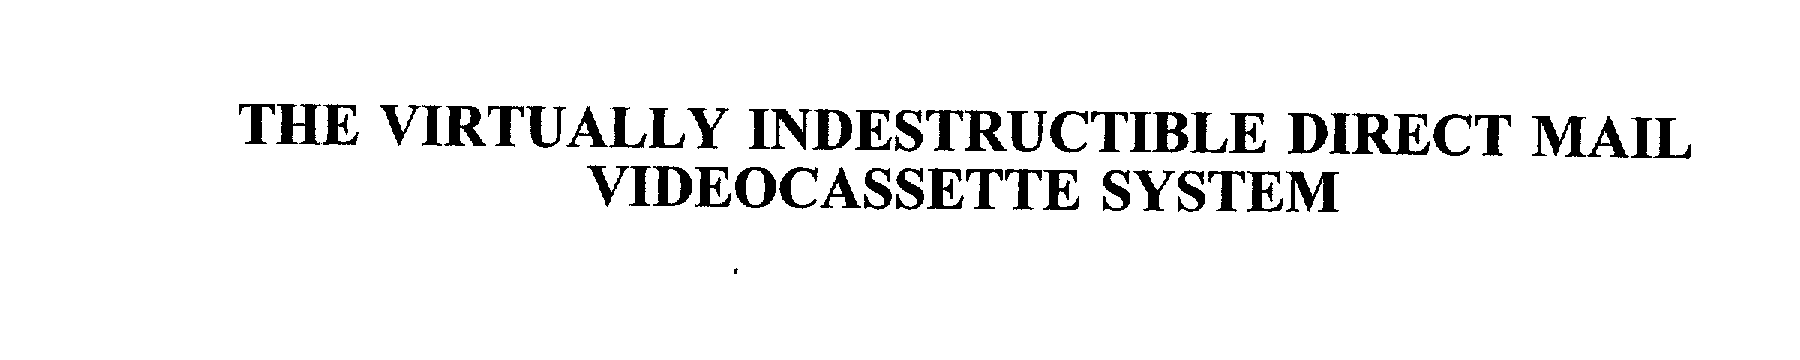  THE VIRTUALLY INDESTRUCTIBLE DIRECT MAIL VIDEOCASSETTE SYSTEM